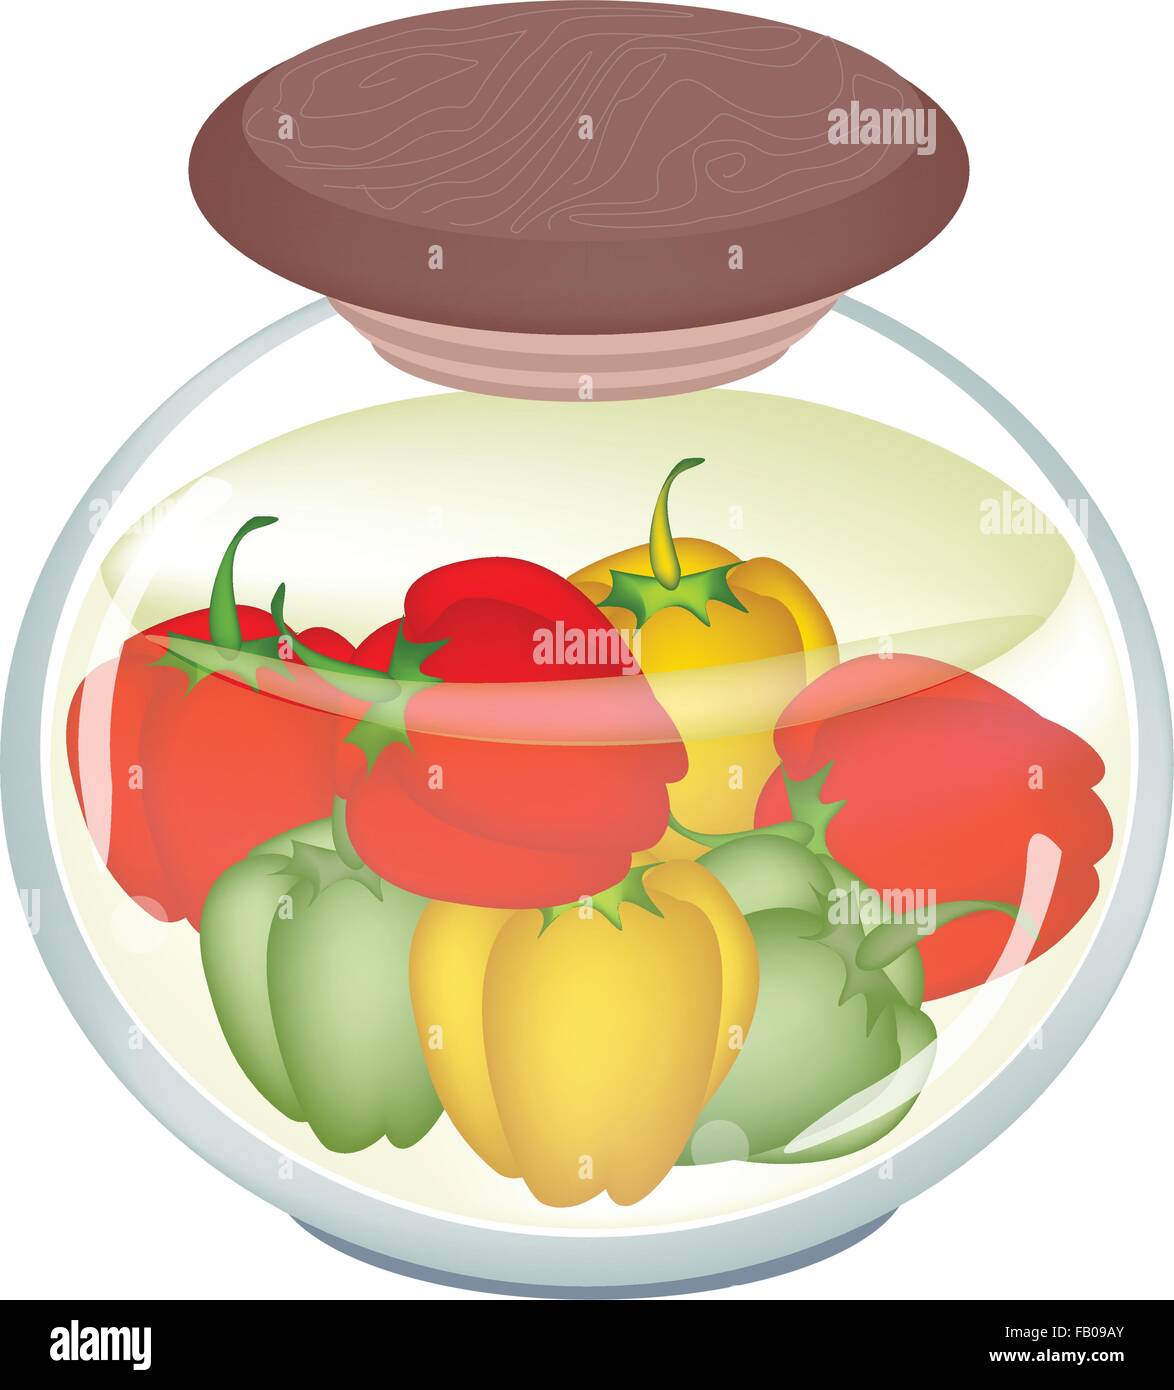 Illustration of Delicious Pickled Bell Peppers or Sweet Peppers in Vinegar, Sugar, Salt and Condiment in A Glass Jar. Stock Vector